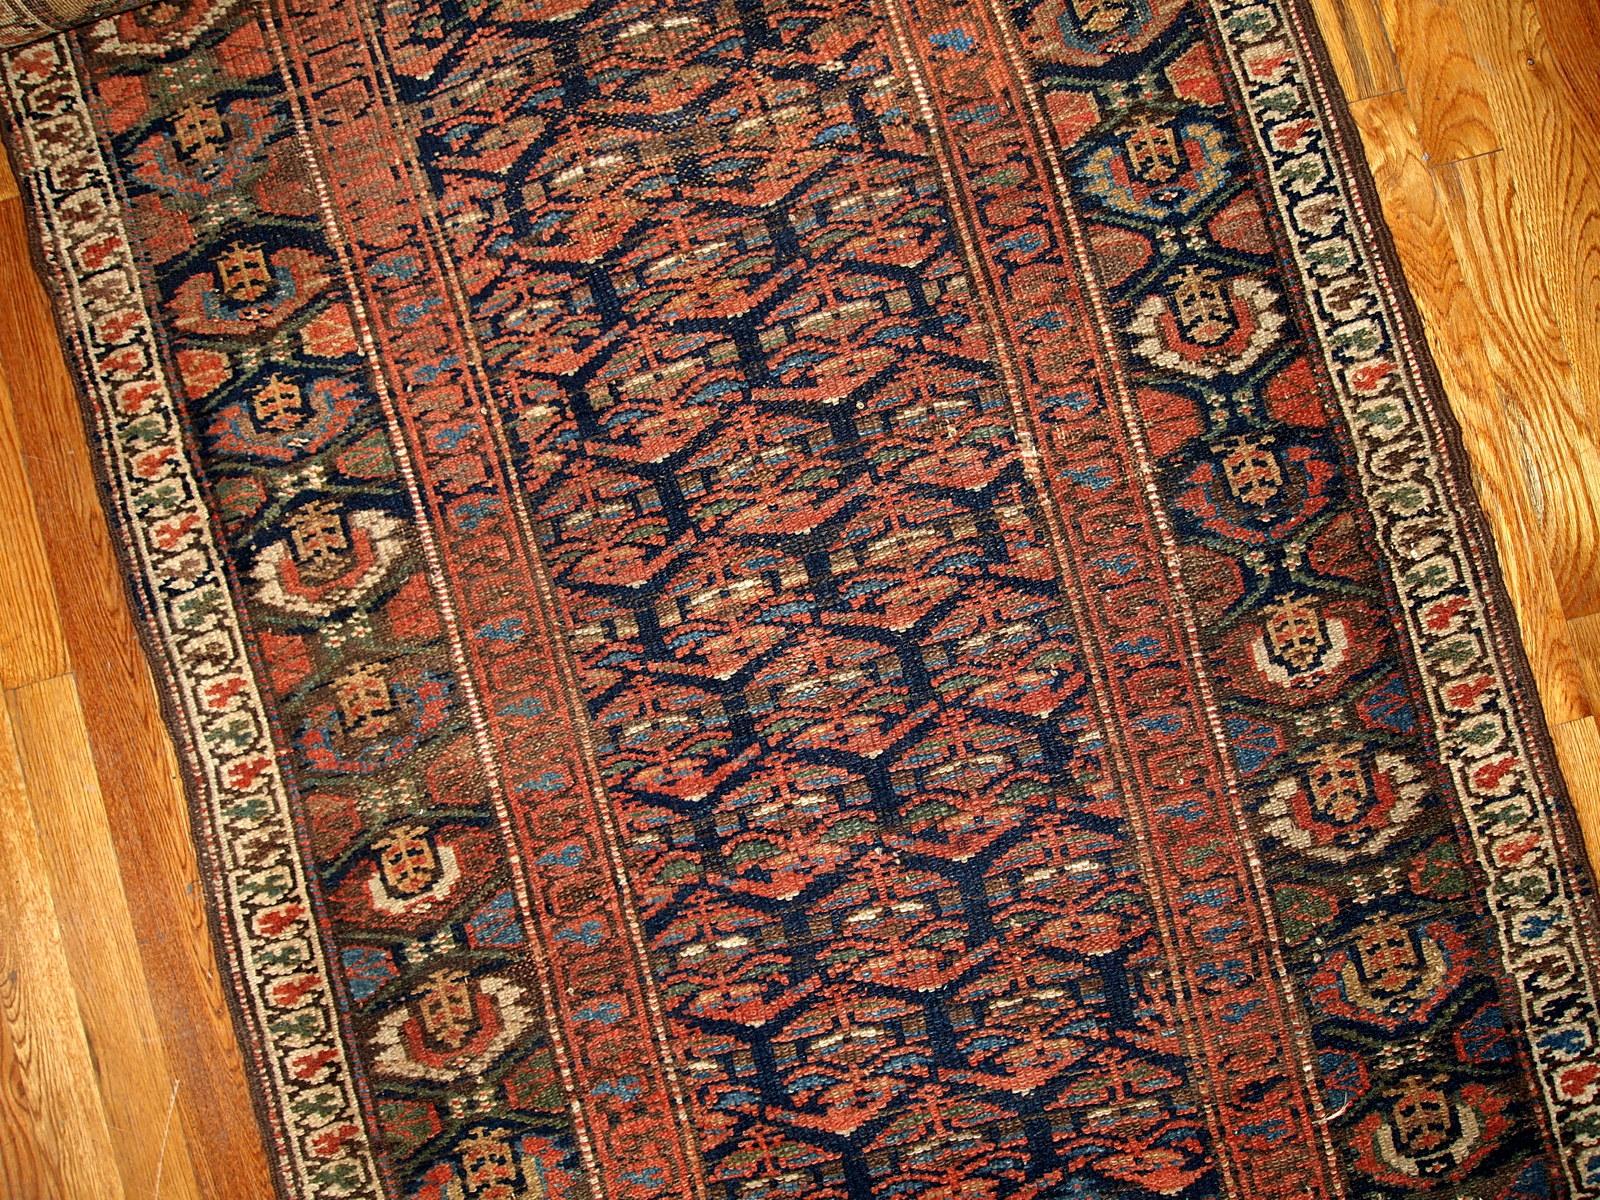 Antique hand made Kurdish style runner in navy blue and red shades. The rug is from the beginning of 20th century in original good condition.

-condition: original good,

-circa: 1900s,

-size: 3.3' x 11.7' ( 100cm x 356cm ),

-material: